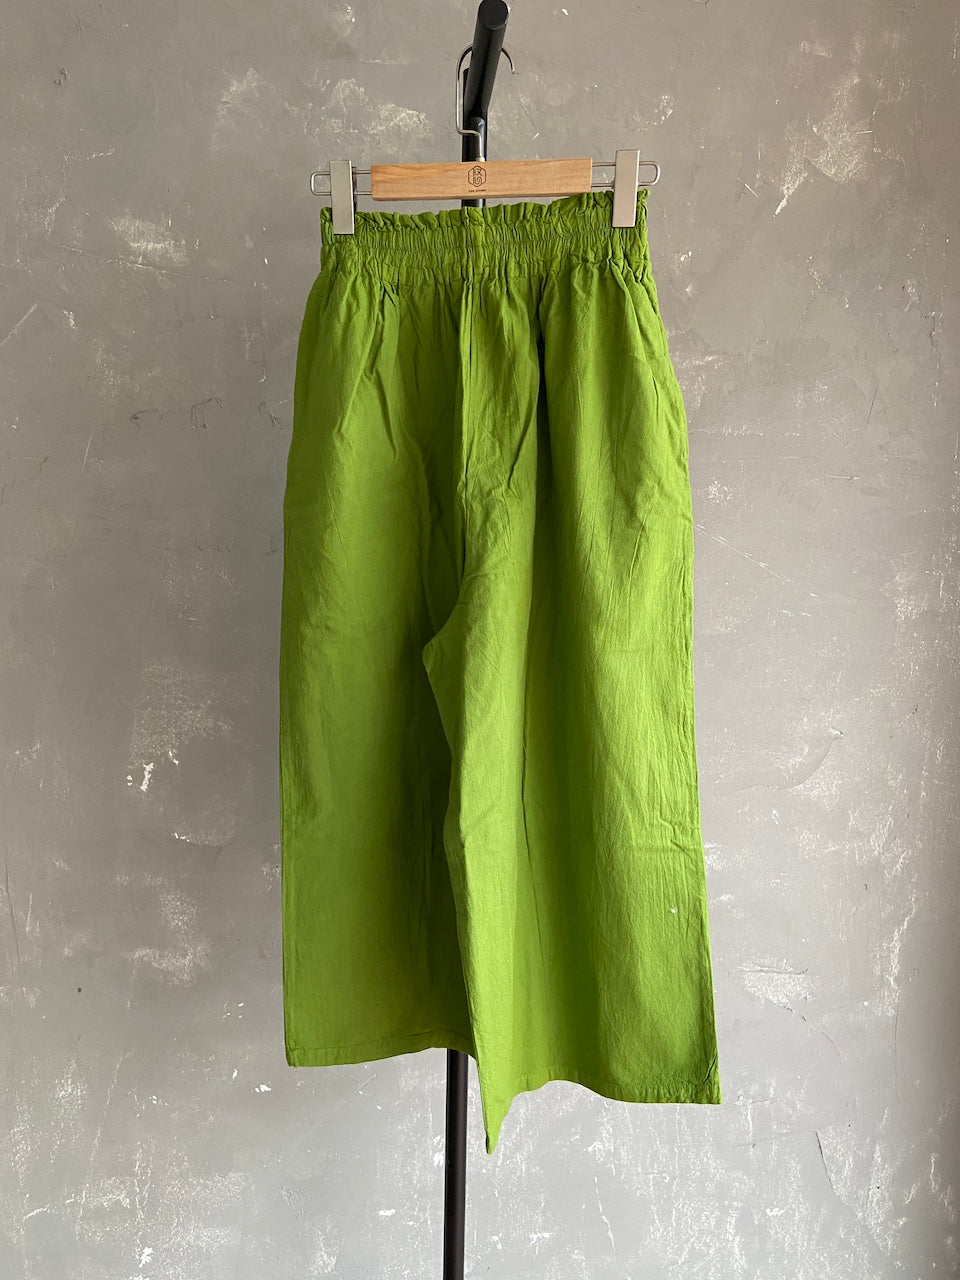 Hand Dyed Farmer's Pants in Green